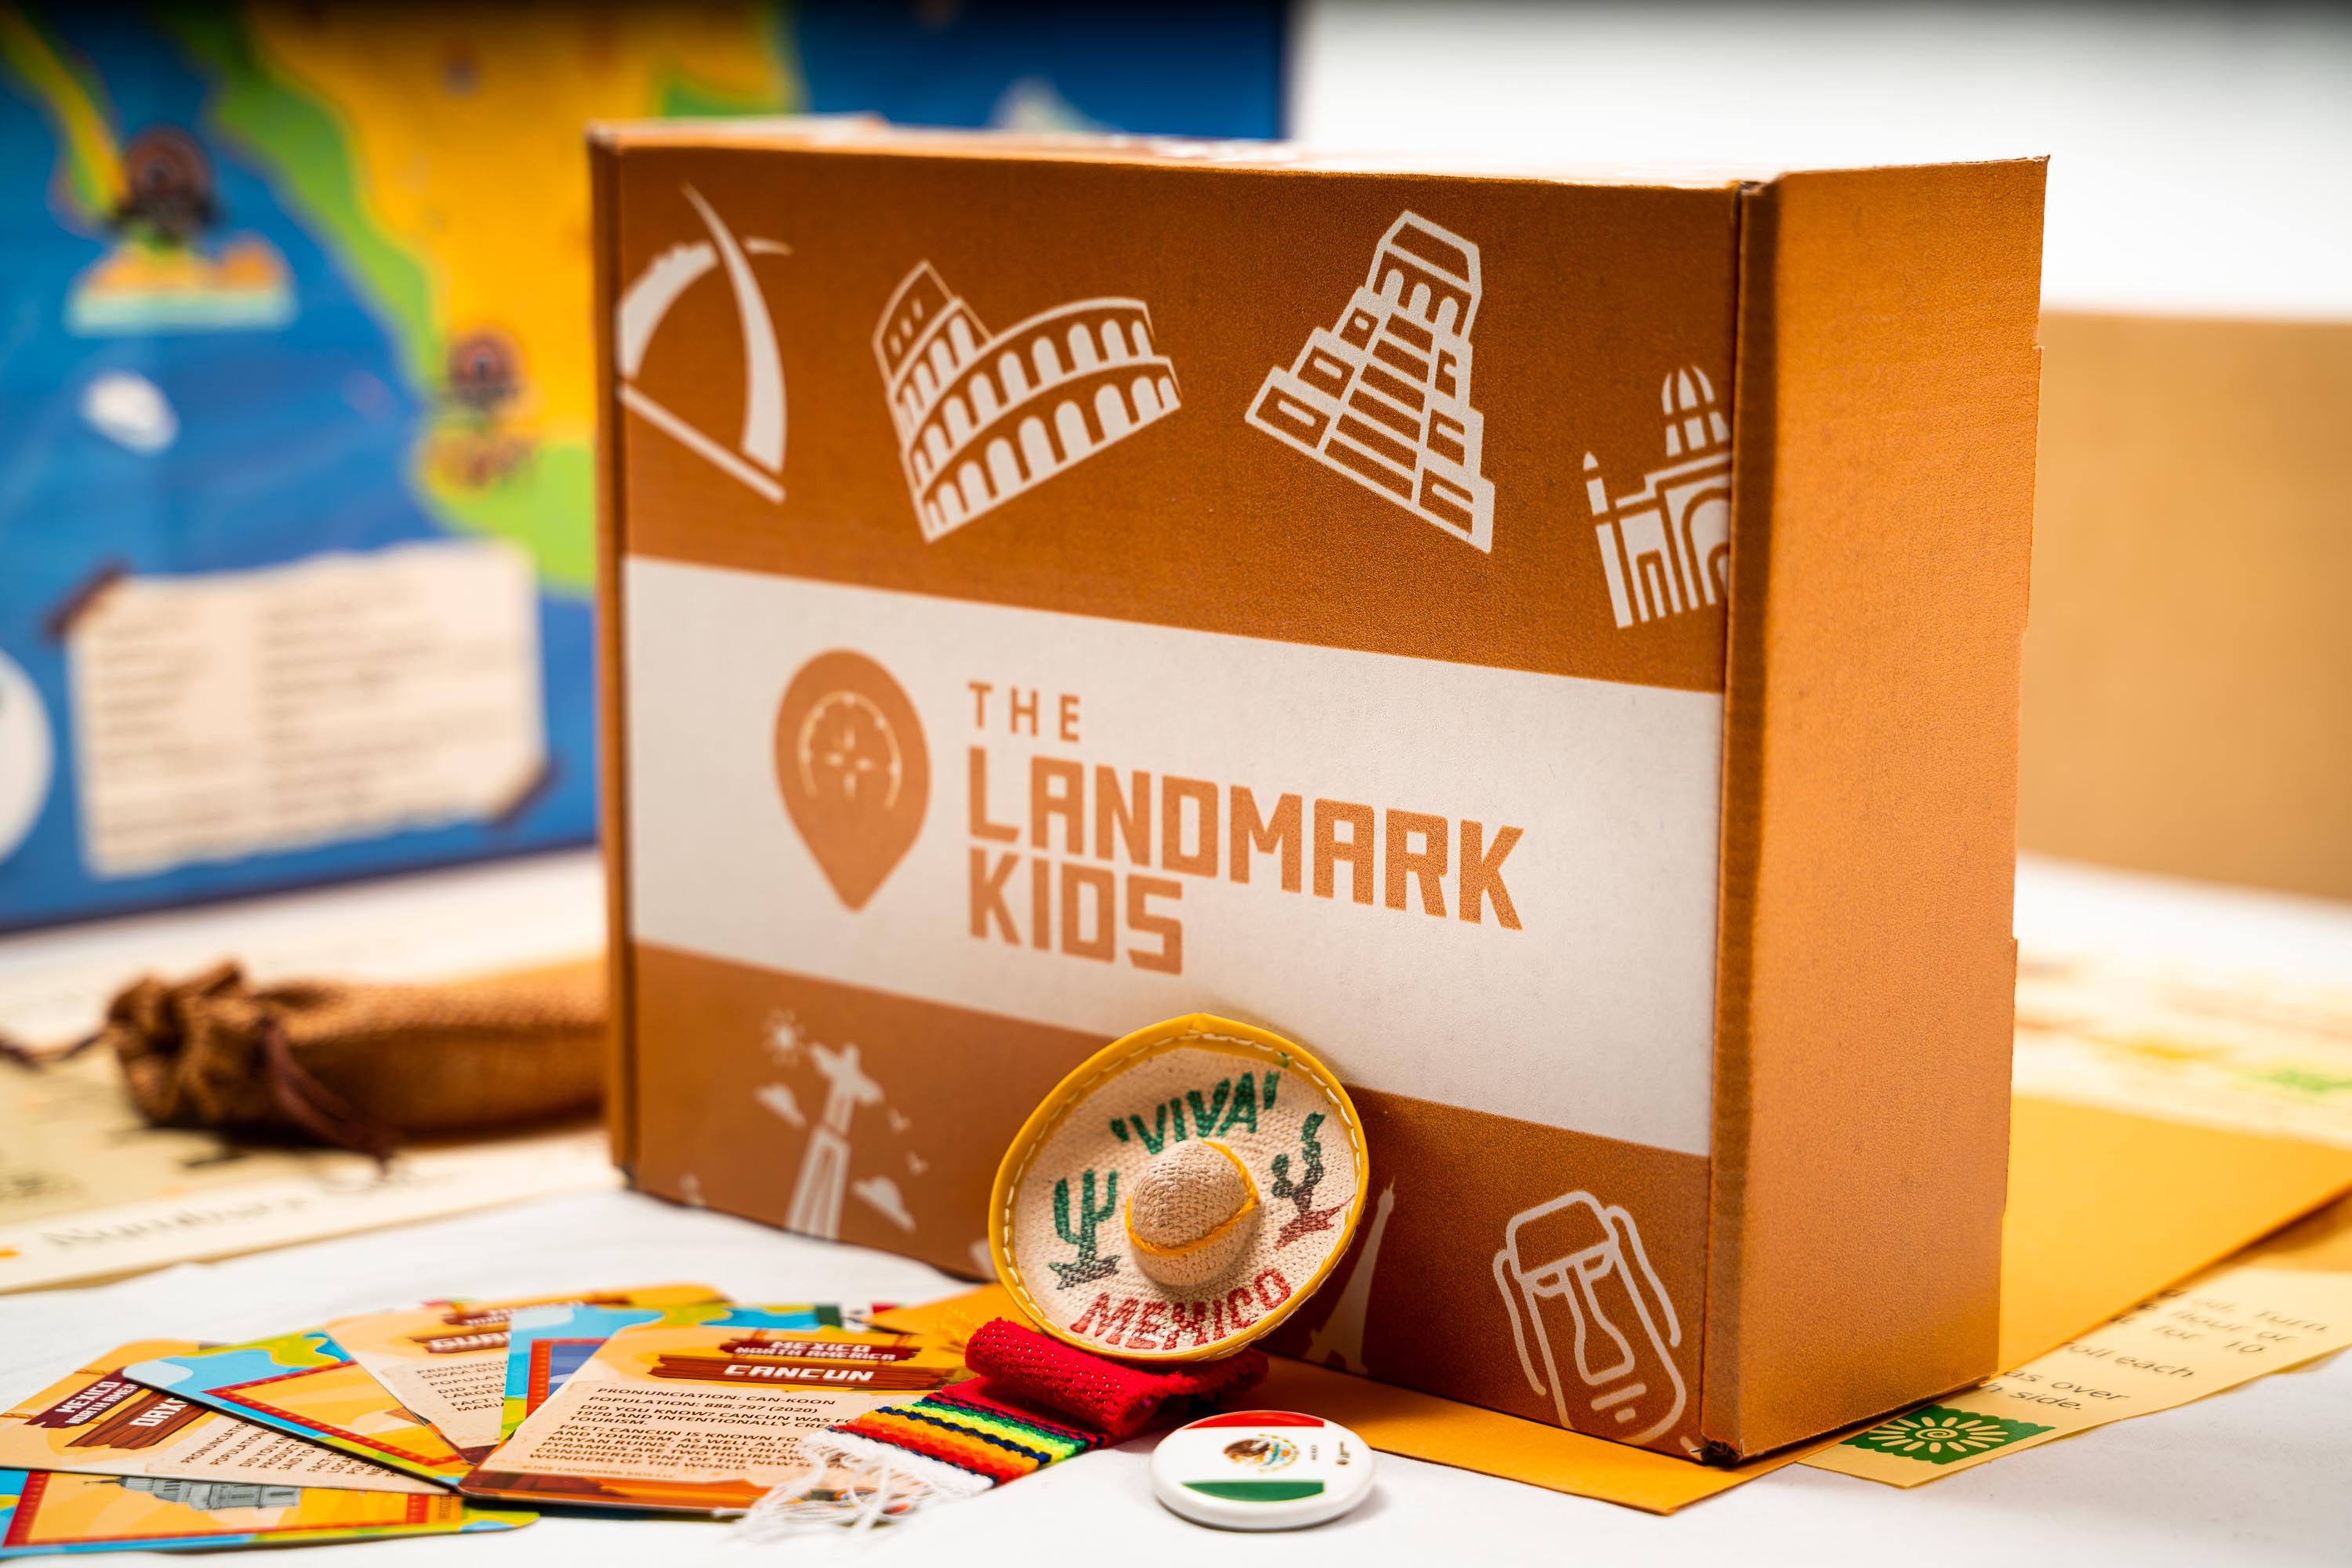 How to Use The Landmark Kids Box for Your Homeschool?